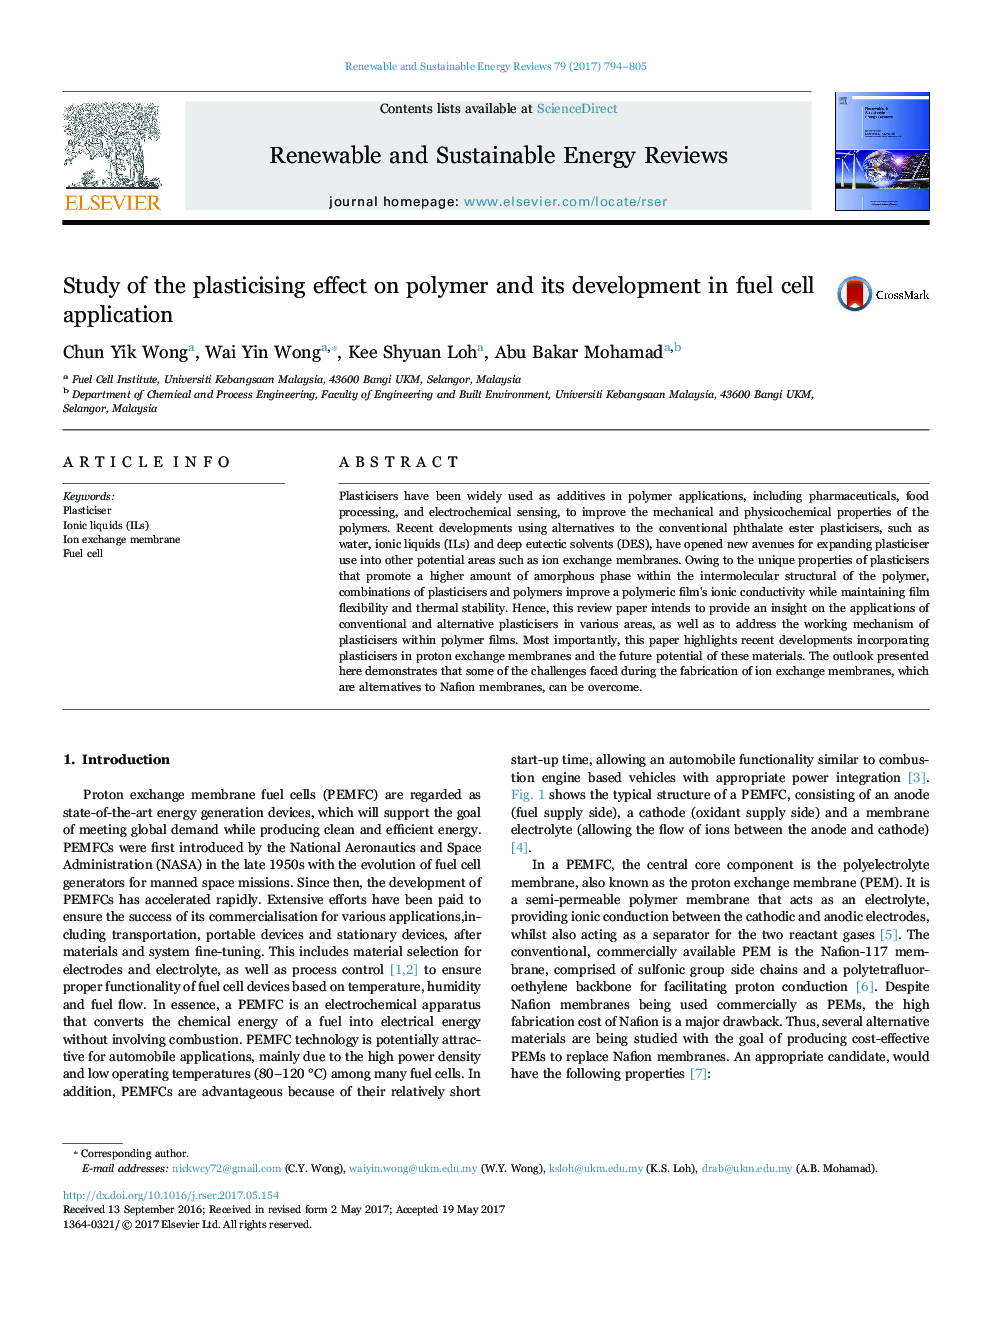 Study of the plasticising effect on polymer and its development in fuel cell application